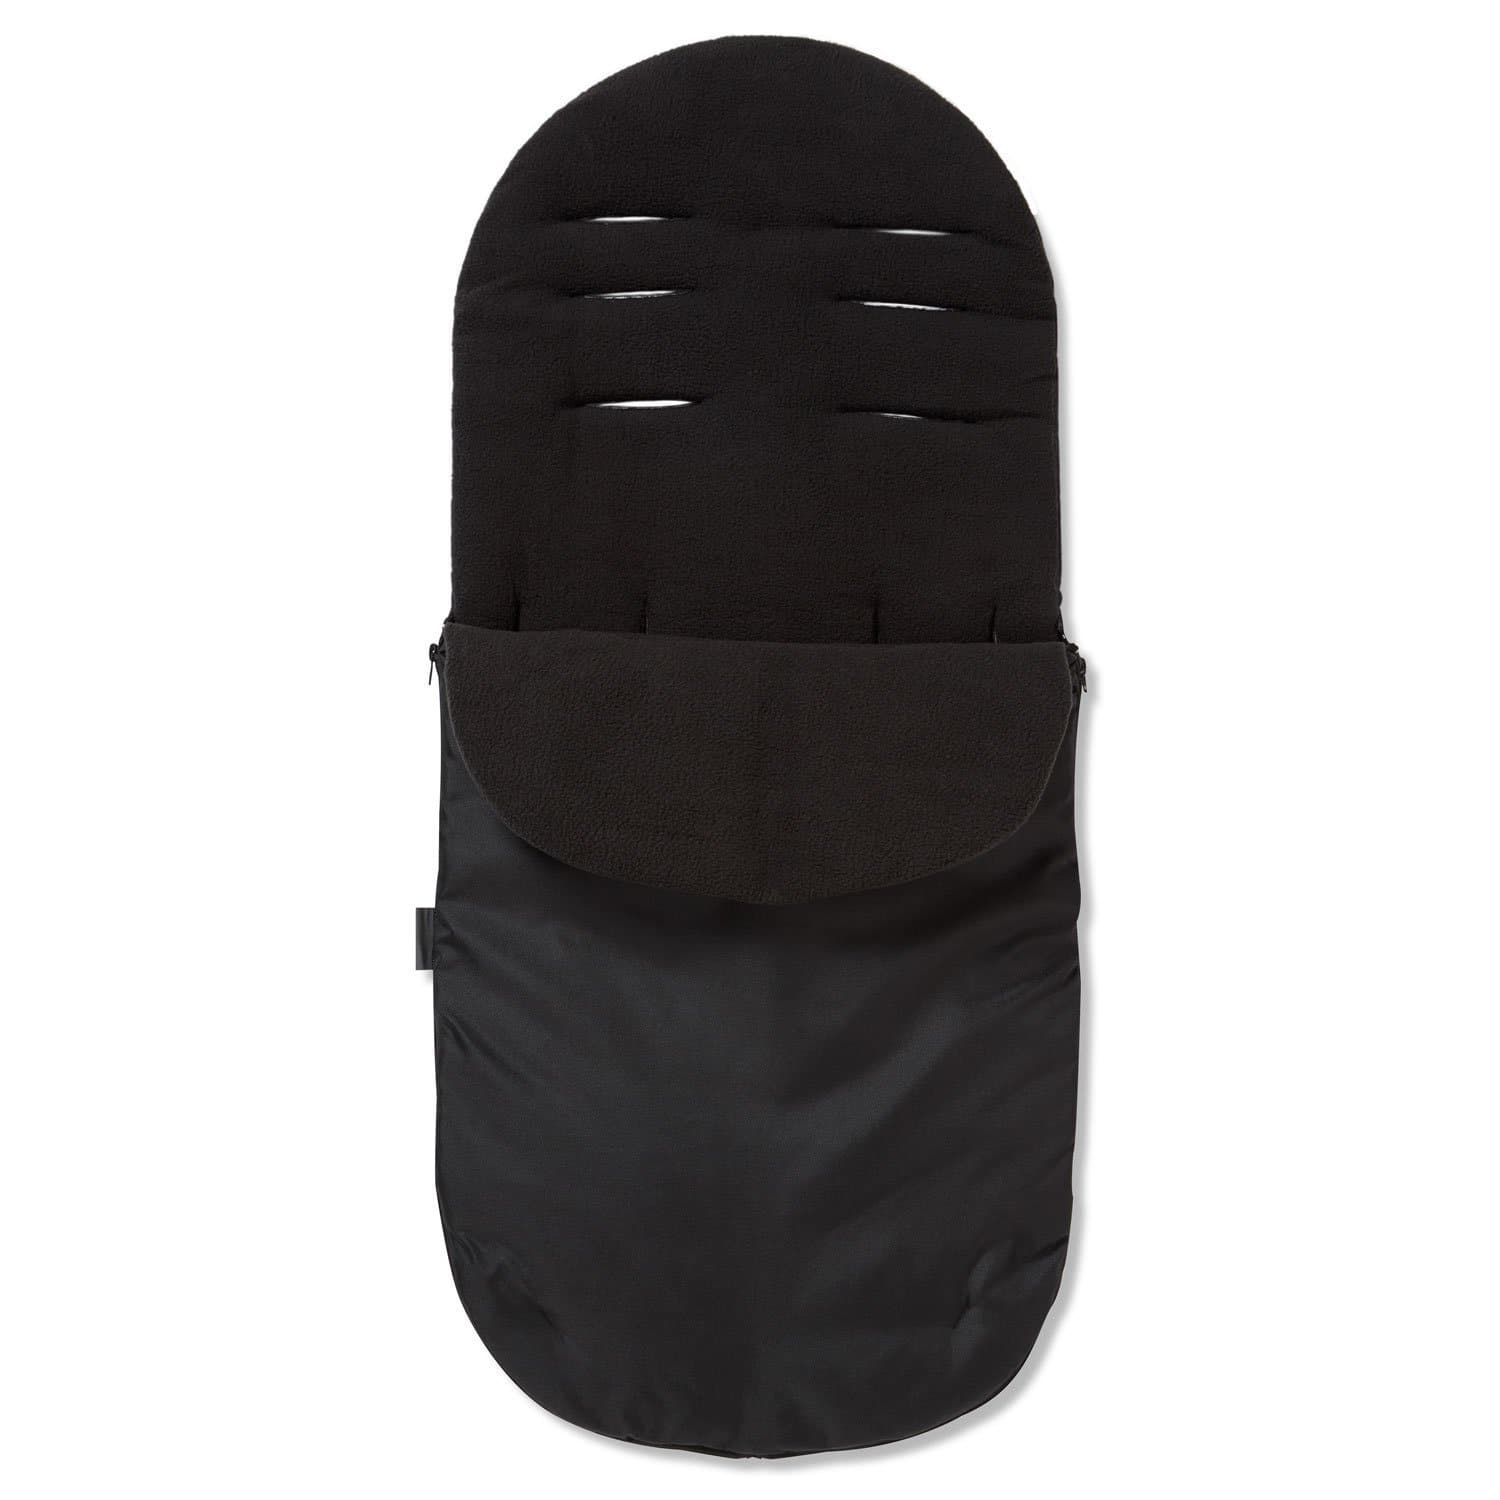 Footmuff / Cosy Toes Compatible with Stokke - Black / Fits All Models | For Your Little One